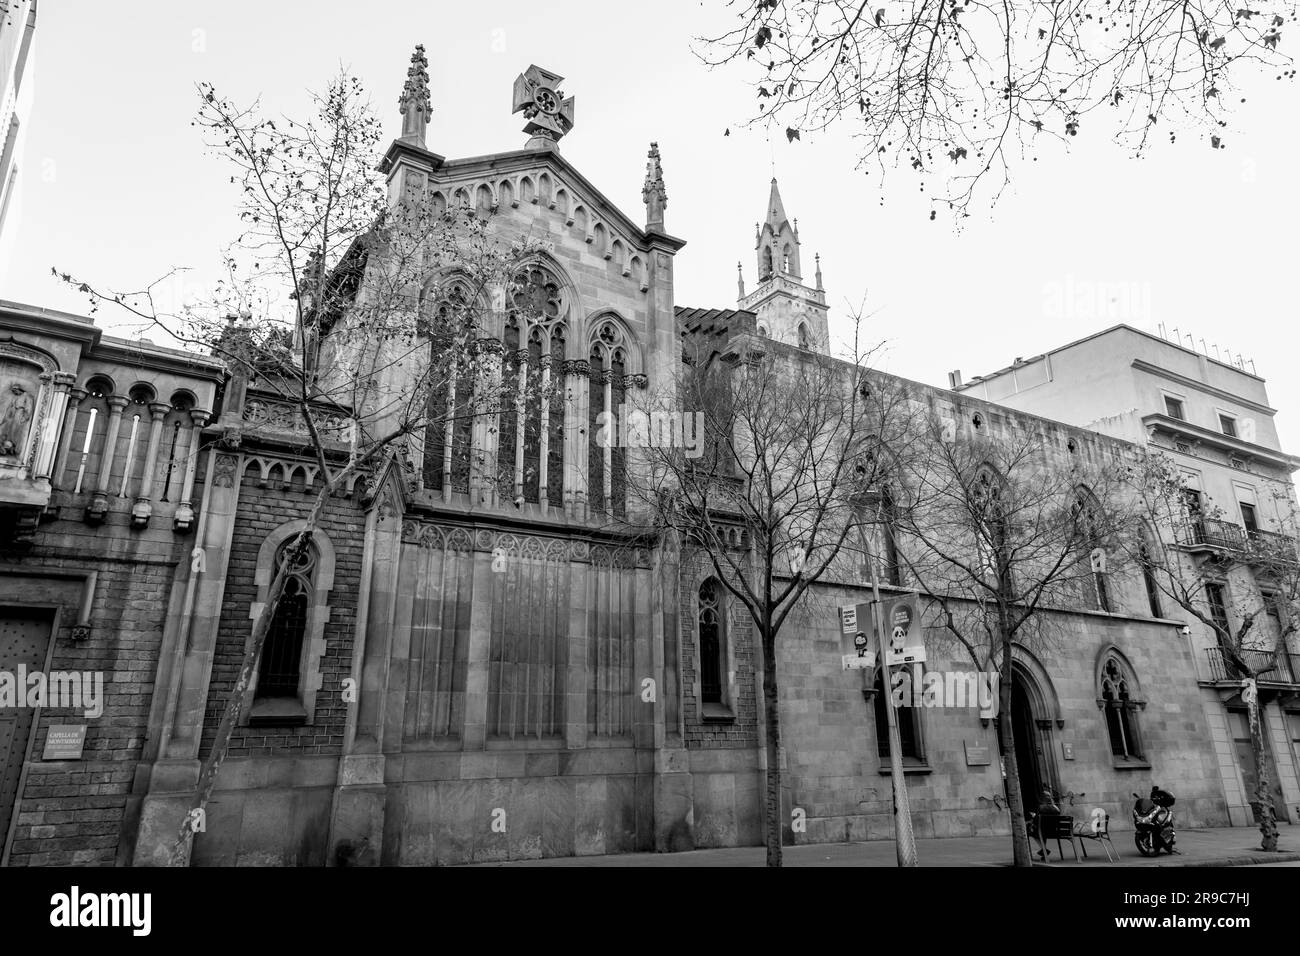 Barcelona, Spain - FEB 10, 2022: The exterior of the Basilica of the Pure Conception in Barcelona, Spain. Stock Photo